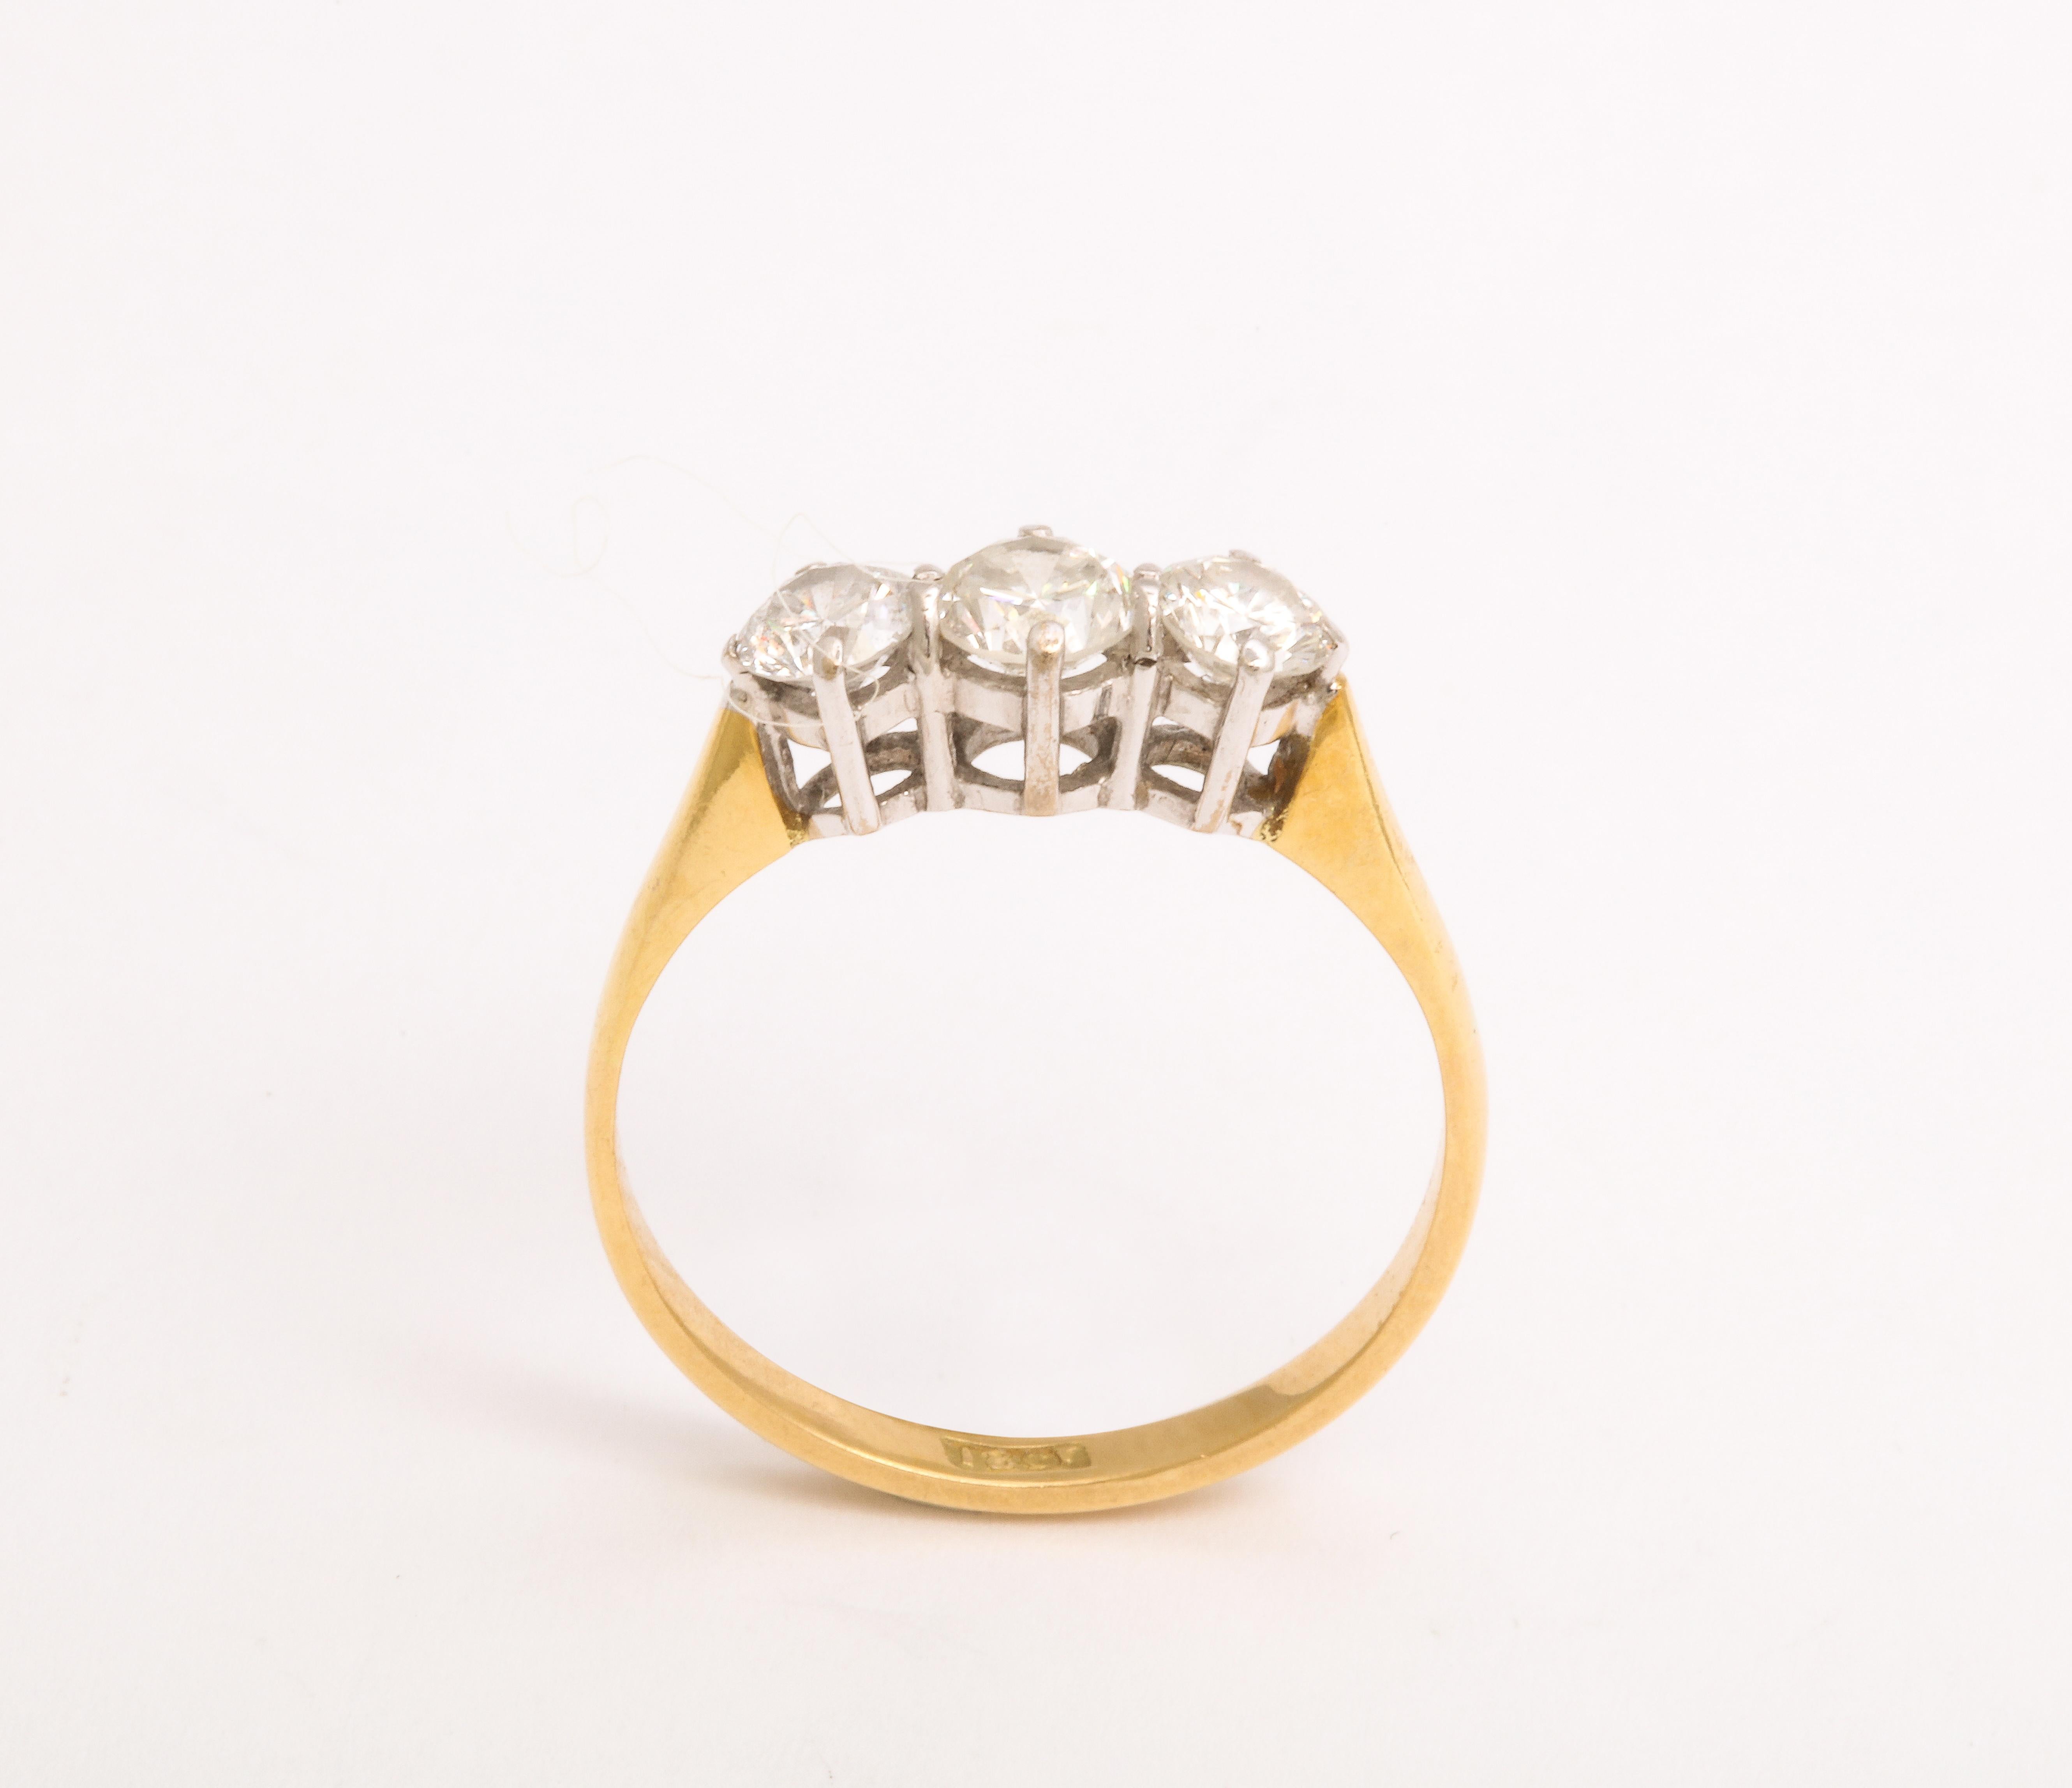 Edwardian 18 Karat Gold Diamond Three Stone Ring In Excellent Condition For Sale In Stamford, CT